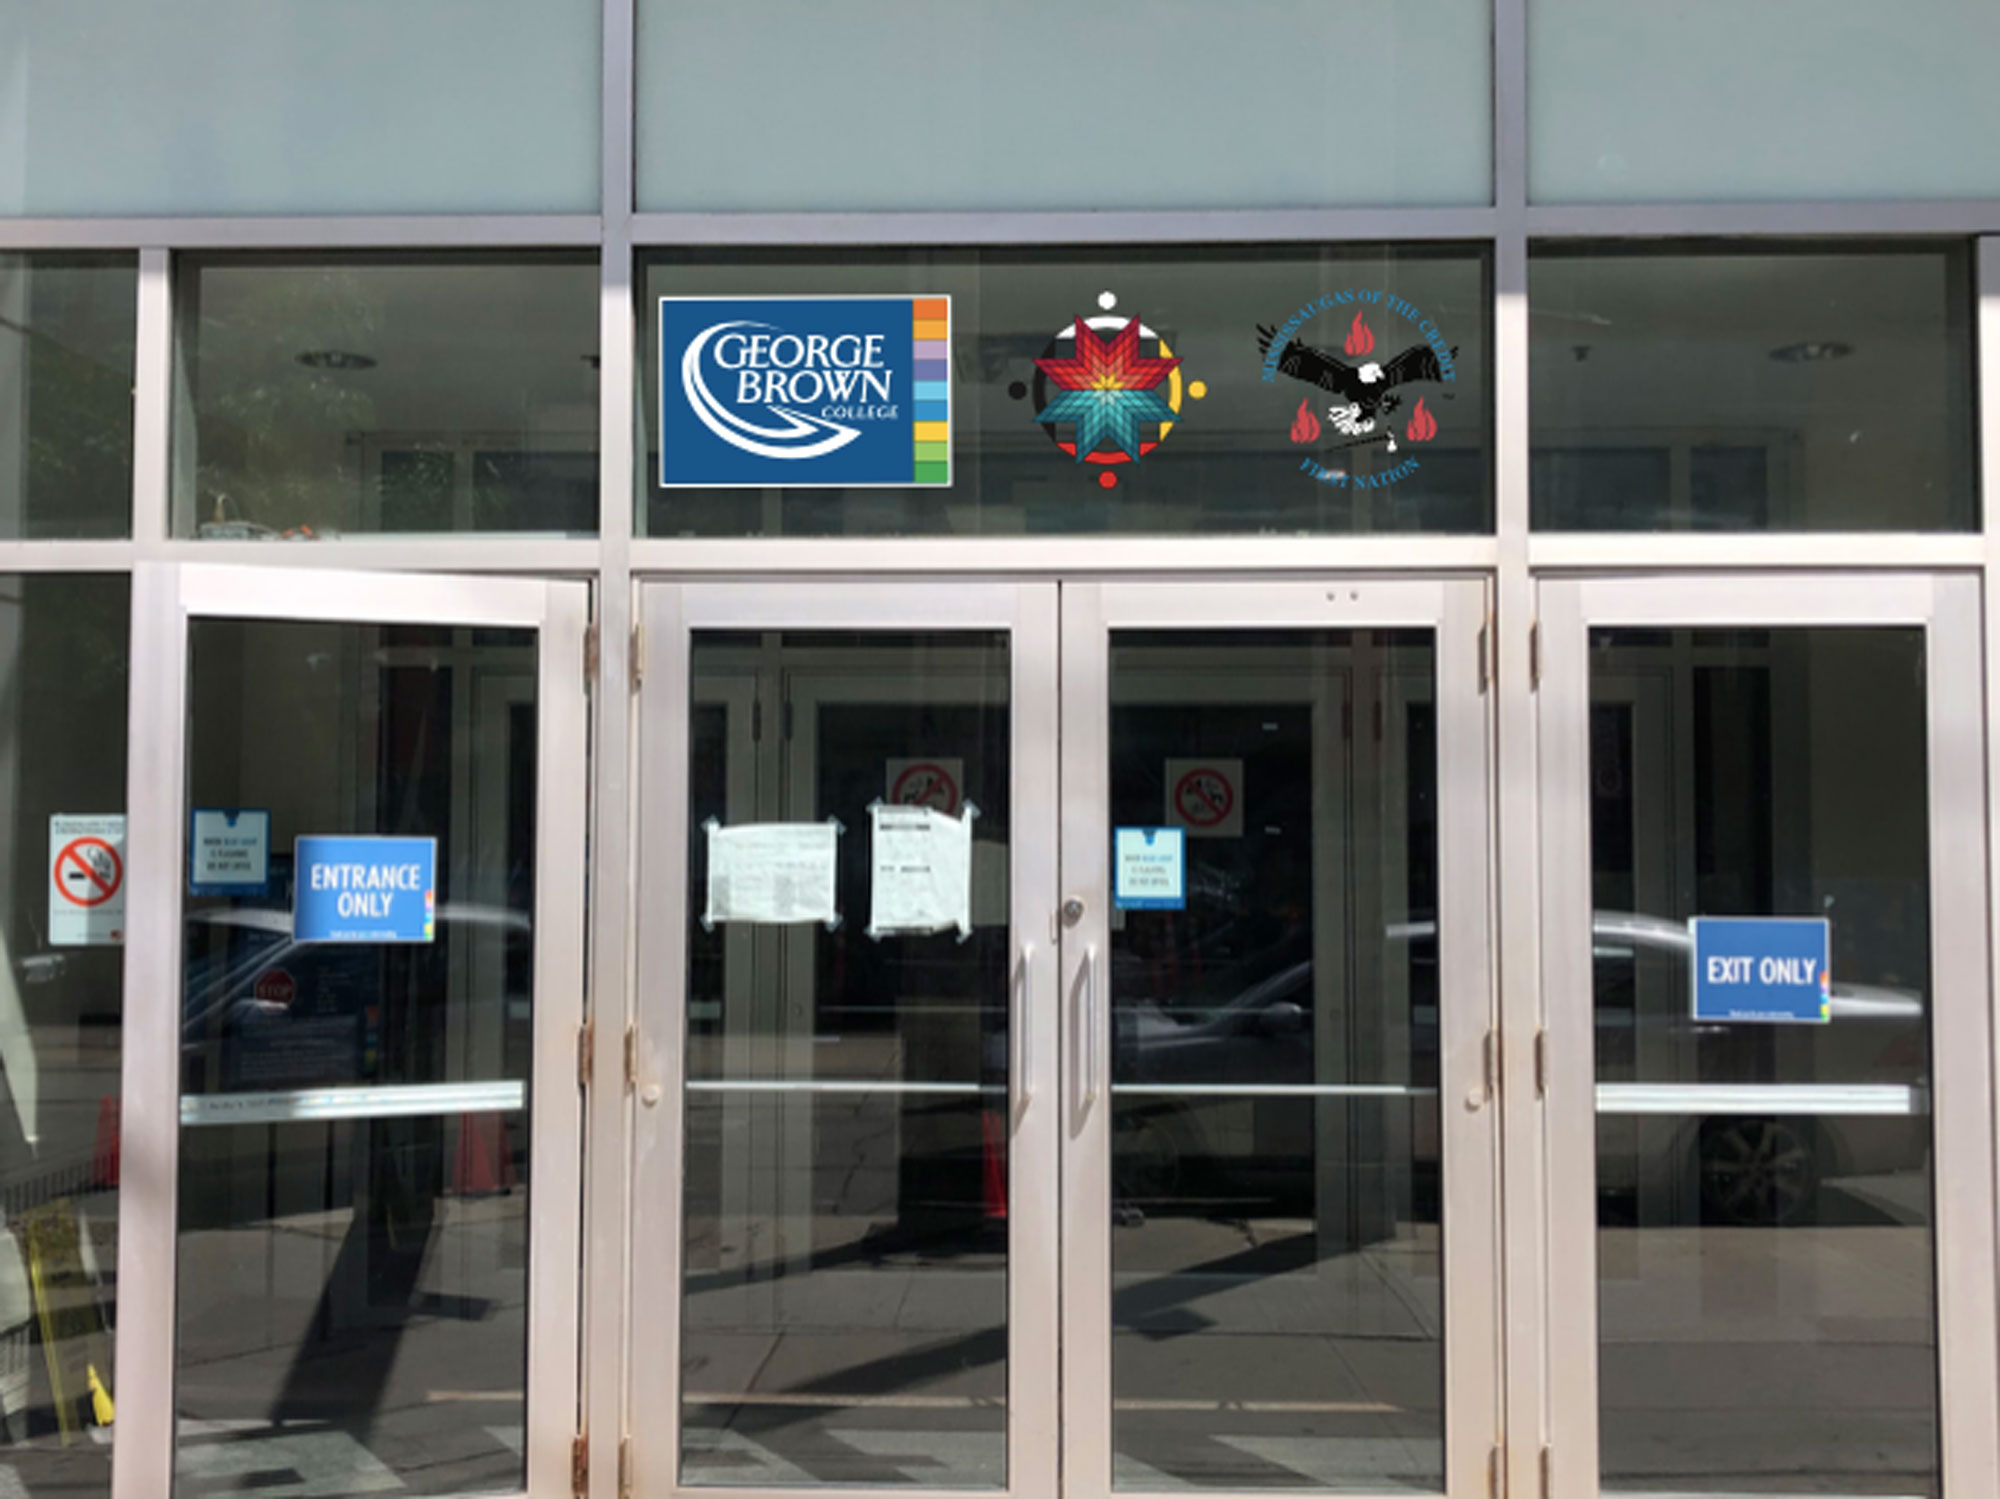 The crest of the Mississaugas of the Credit First Nation, along with the medallion of our Indigenous Initiatives team, proudly displayed next to the George Brown College logo above a campus doorway.